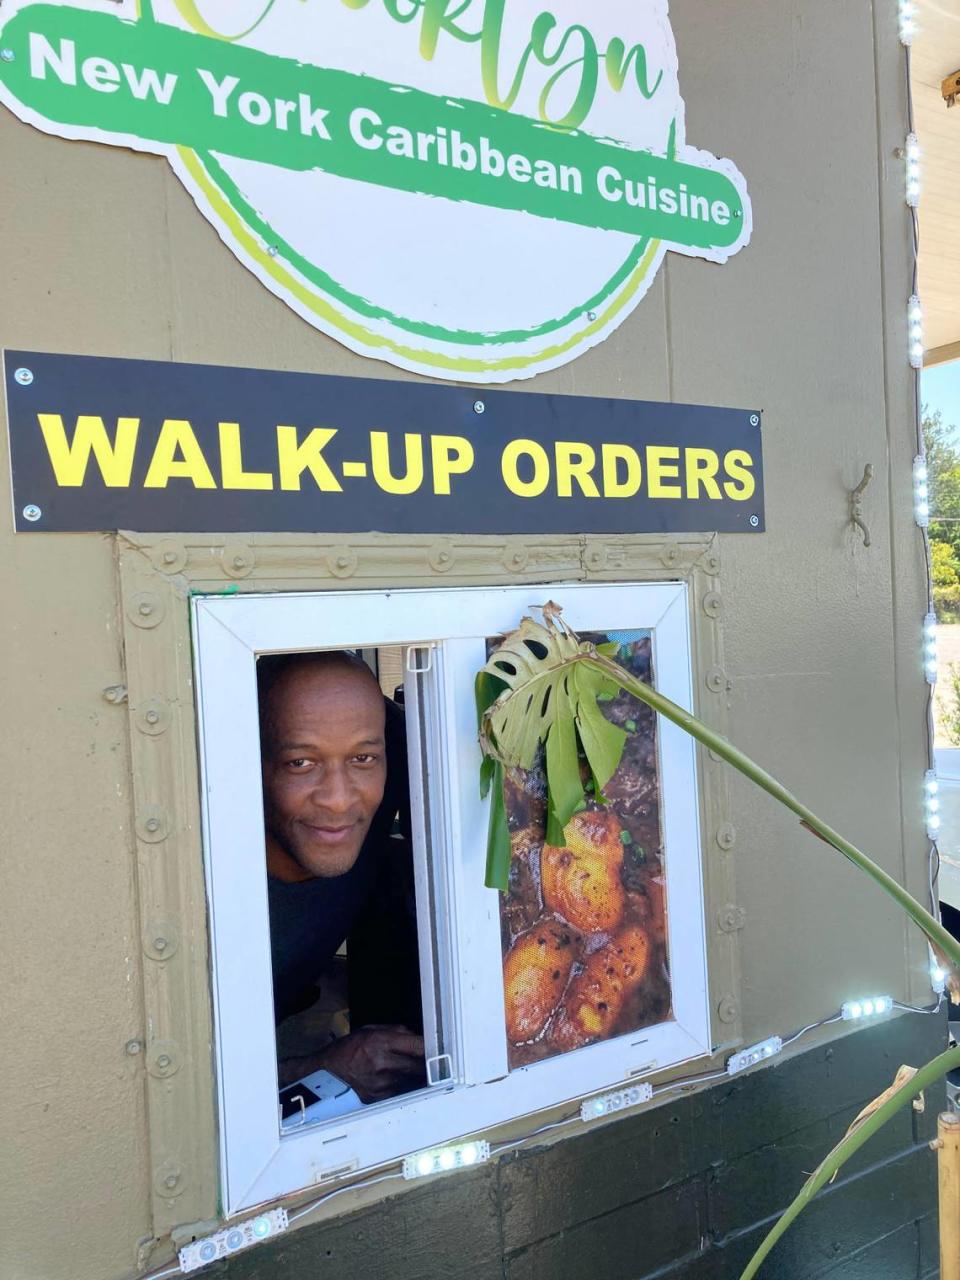 Crooklyn New York Caribbean Cuisine co-owner and chef Winston Cunningham looks out the walk-up window of their family restaurant.